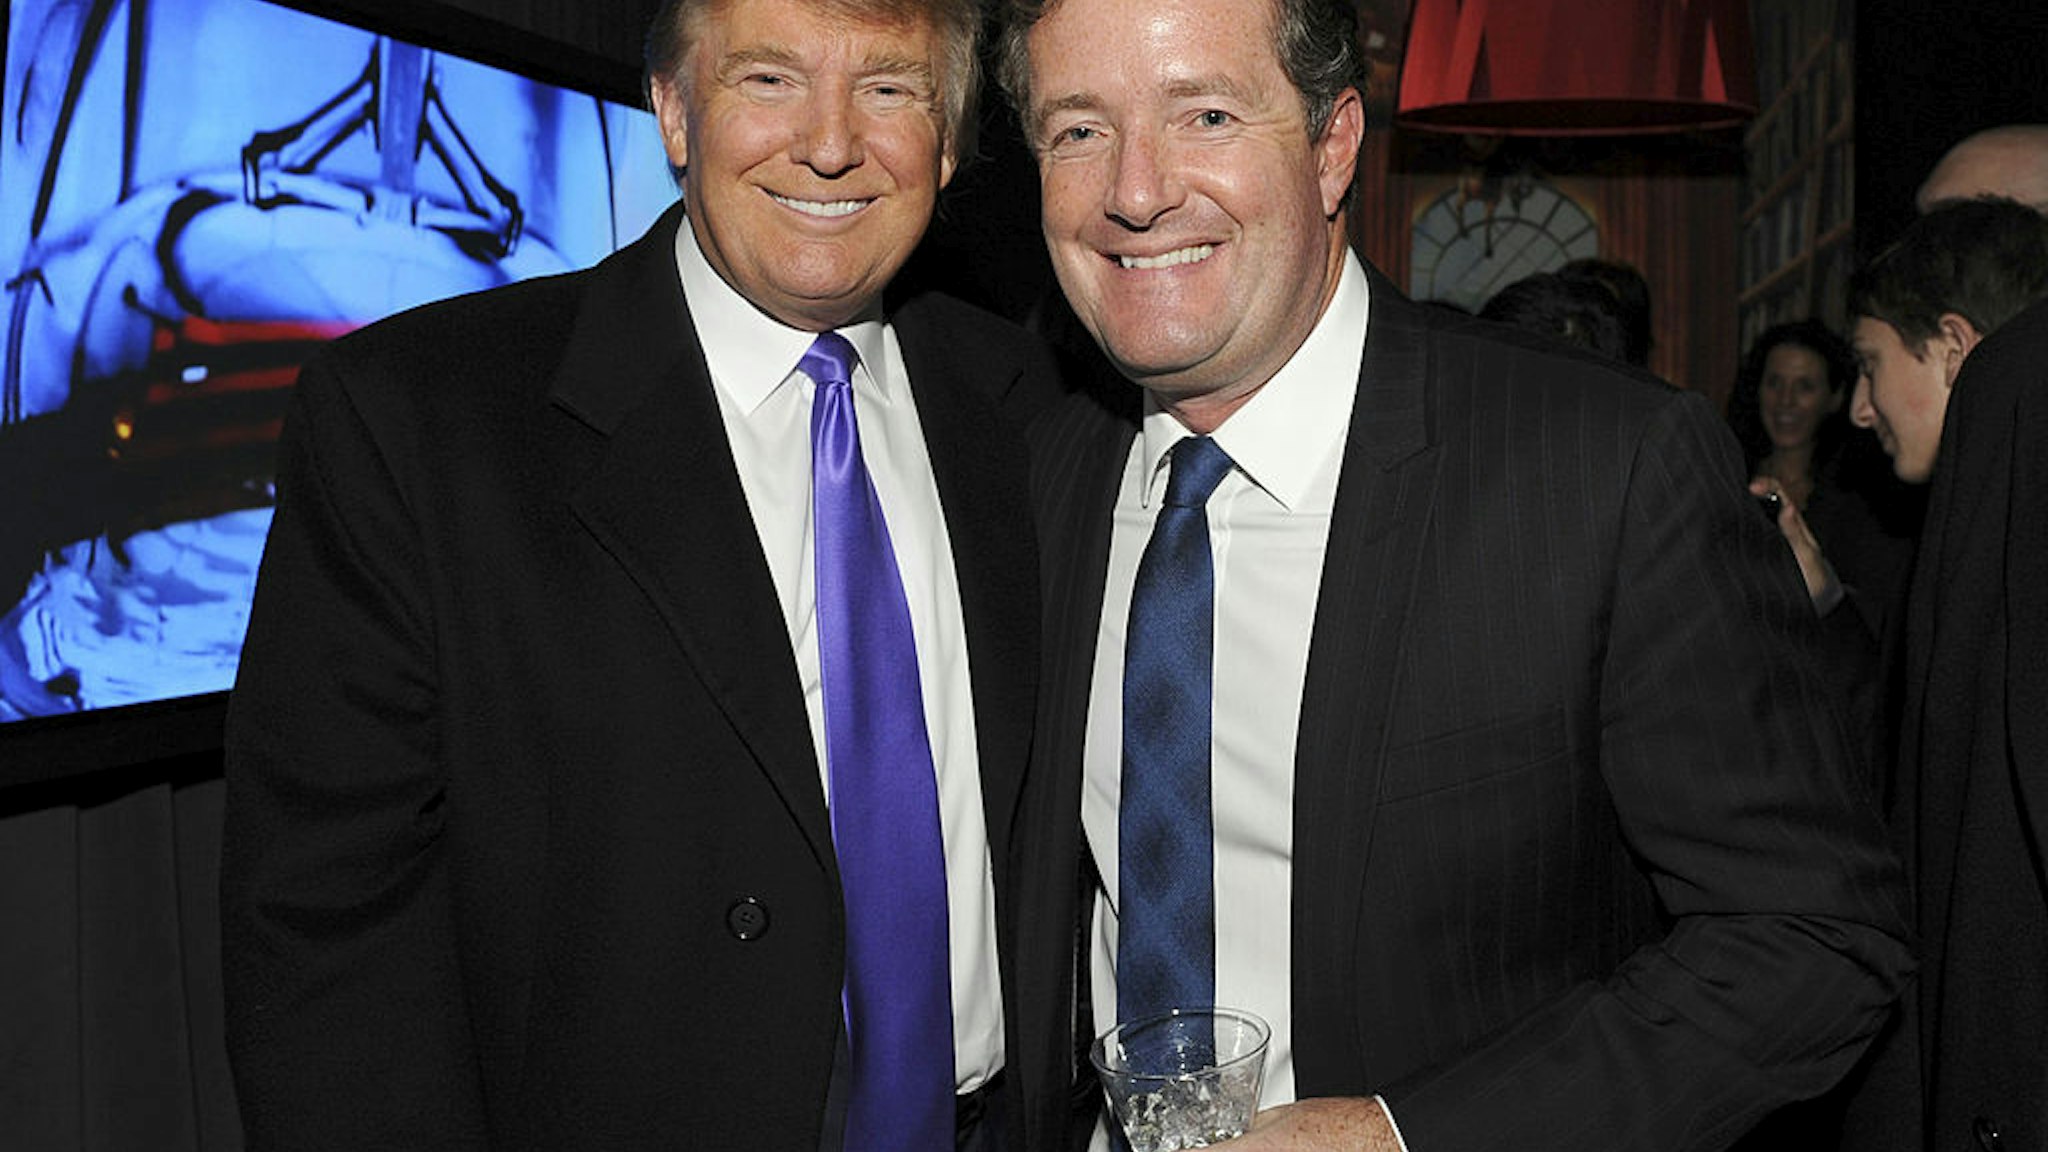 Television Personality Donald Trump and journalist Piers Morgan attend the celebration of Perfumania and Kim Kardashian�s appearance on NBC�s "The Apprentice" at the Provocateur at The Hotel Gansevoort on November 10, 2010 in New York, New York.